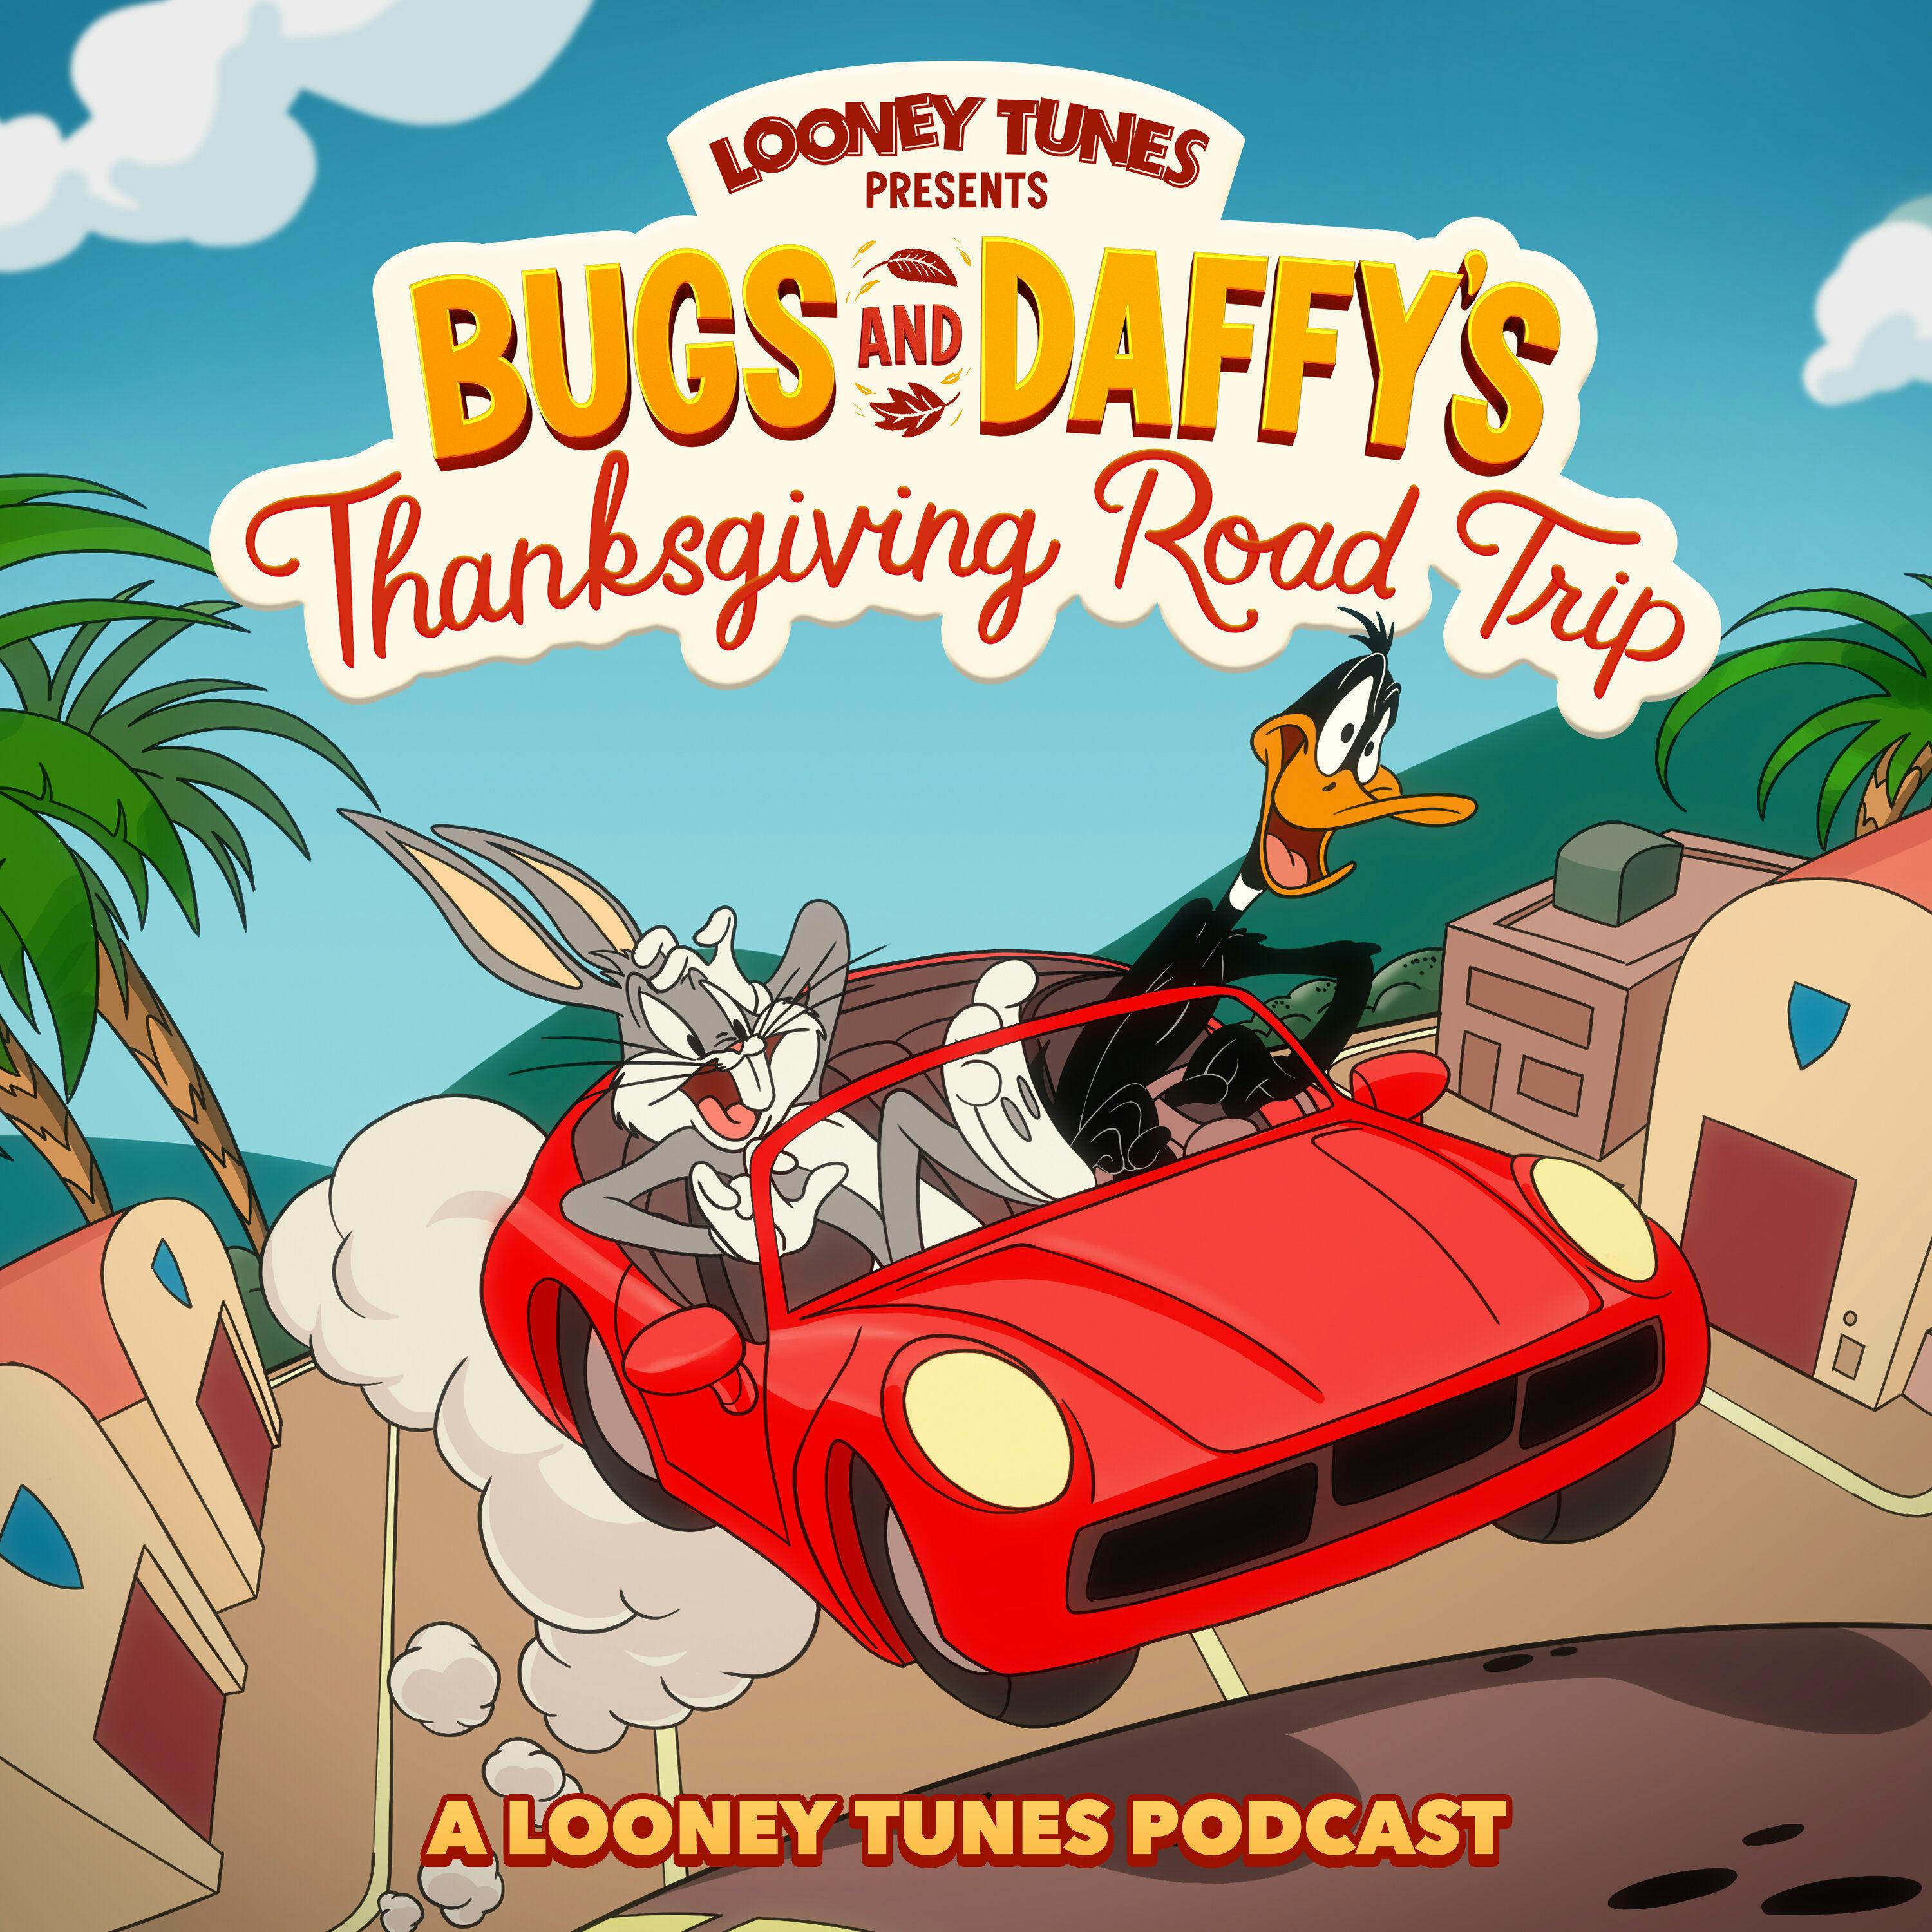 Bugs and Daffy’s Thanksgiving Road Trip